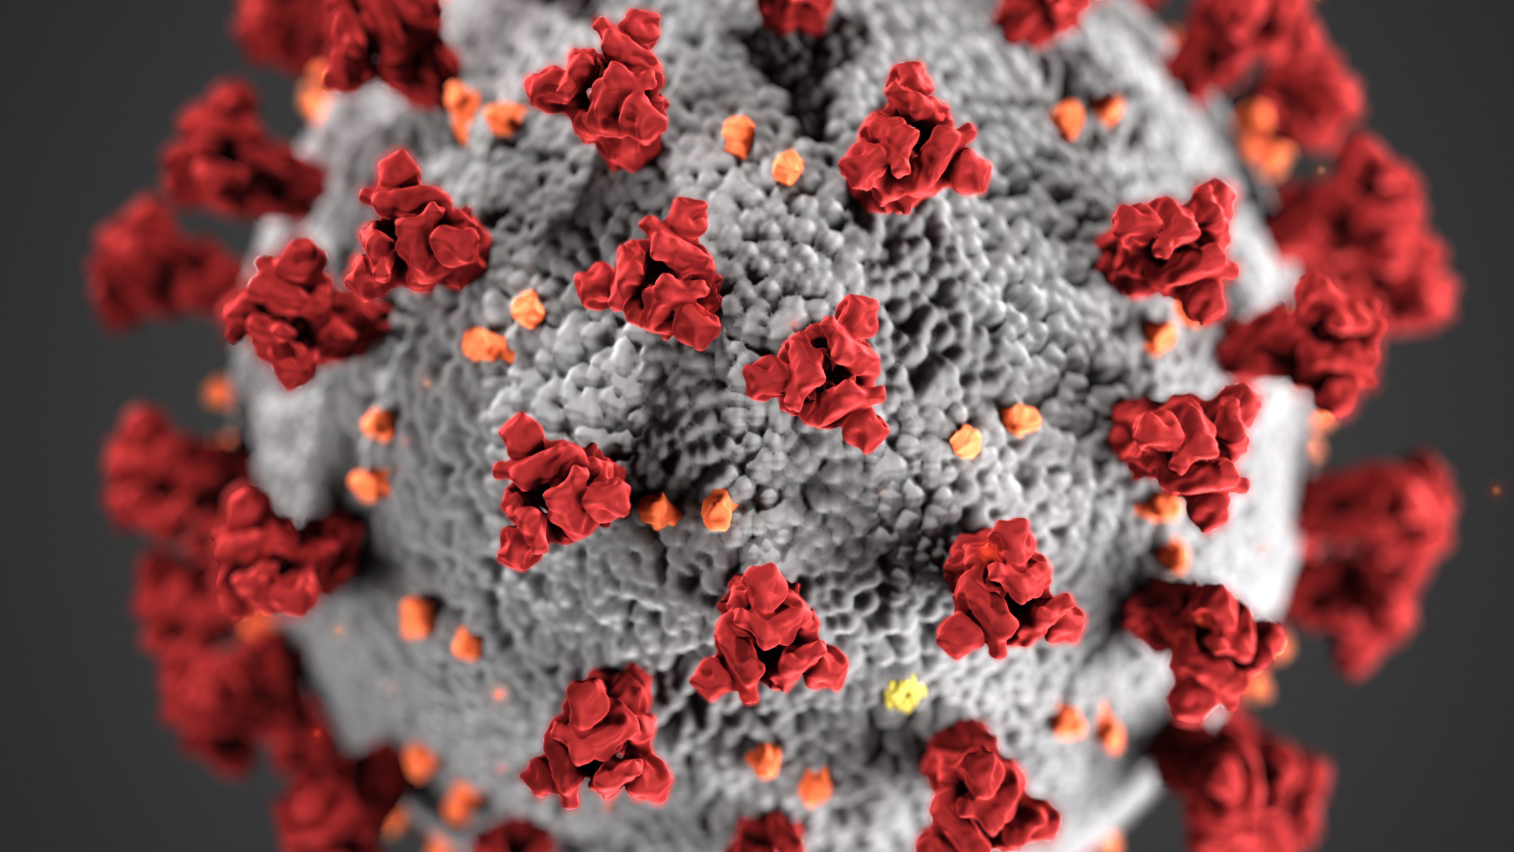 COVID-19 virus. Image by U.S. Department of State